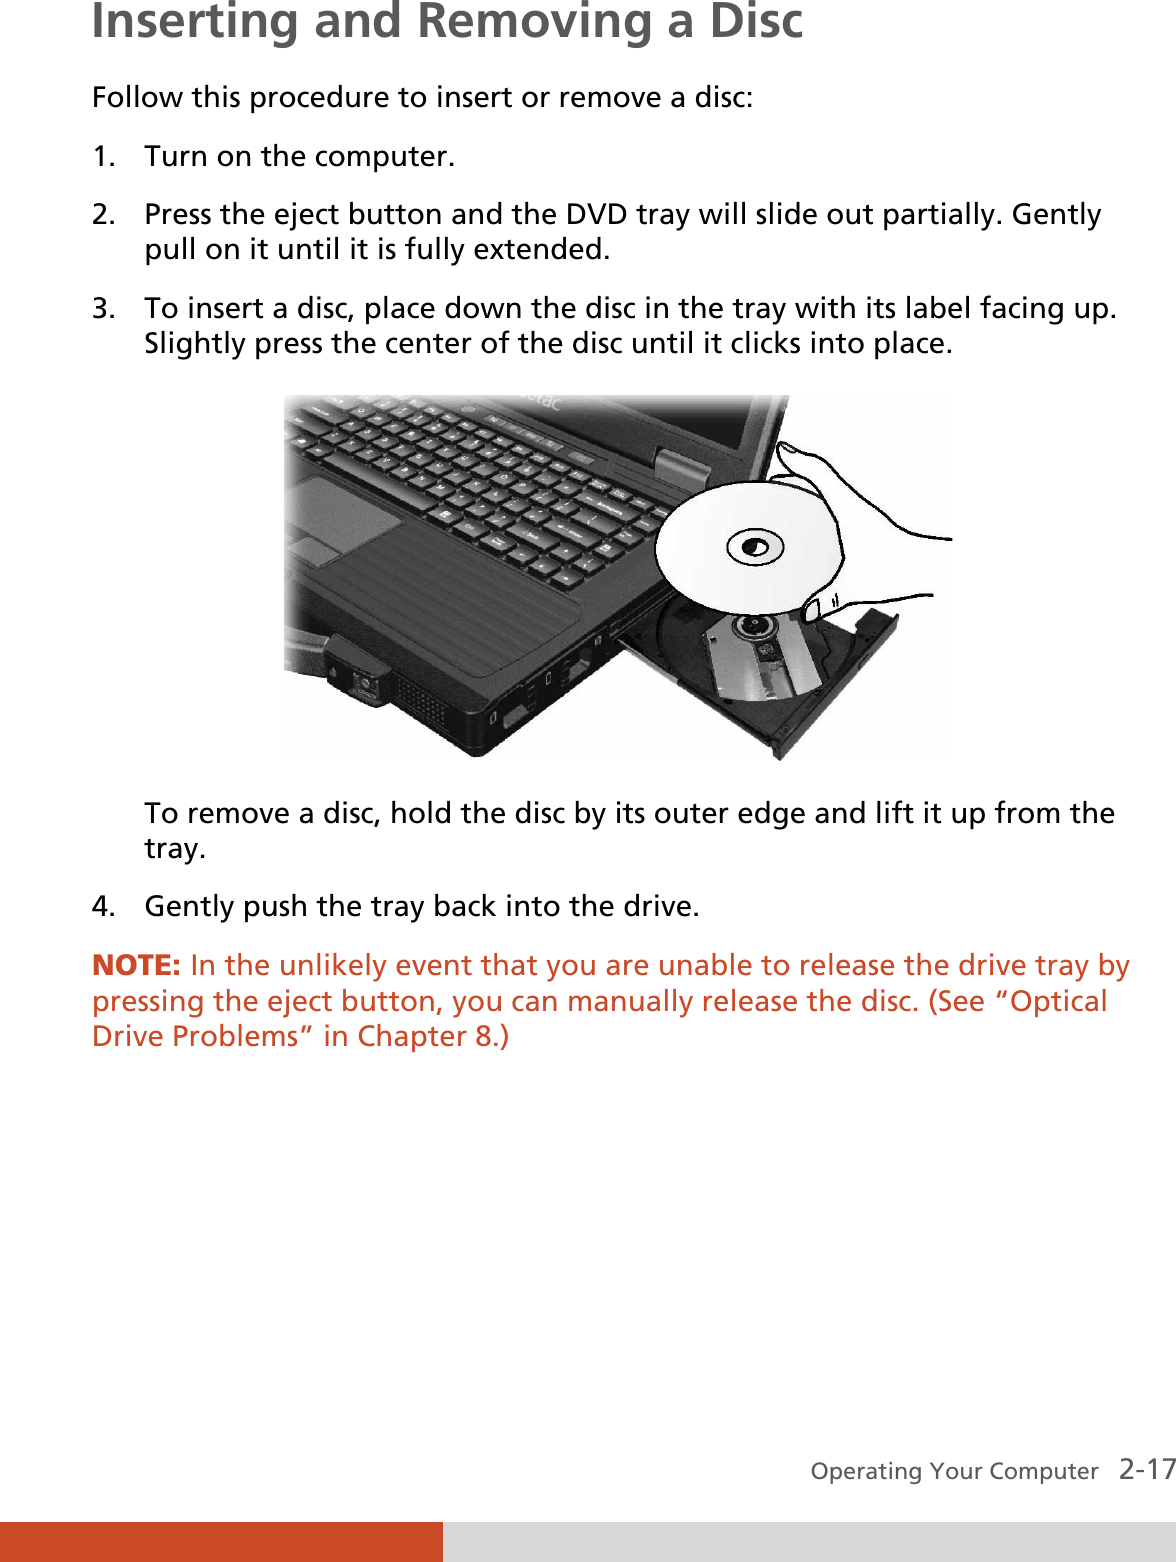  Operating Your Computer   2-17 Inserting and Removing a Disc Follow this procedure to insert or remove a disc: 1. Turn on the computer. 2. Press the eject button and the DVD tray will slide out partially. Gently pull on it until it is fully extended. 3. To insert a disc, place down the disc in the tray with its label facing up. Slightly press the center of the disc until it clicks into place.  To remove a disc, hold the disc by its outer edge and lift it up from the tray. 4. Gently push the tray back into the drive. NOTE: In the unlikely event that you are unable to release the drive tray by pressing the eject button, you can manually release the disc. (See “Optical Drive Problems” in Chapter 8.) 